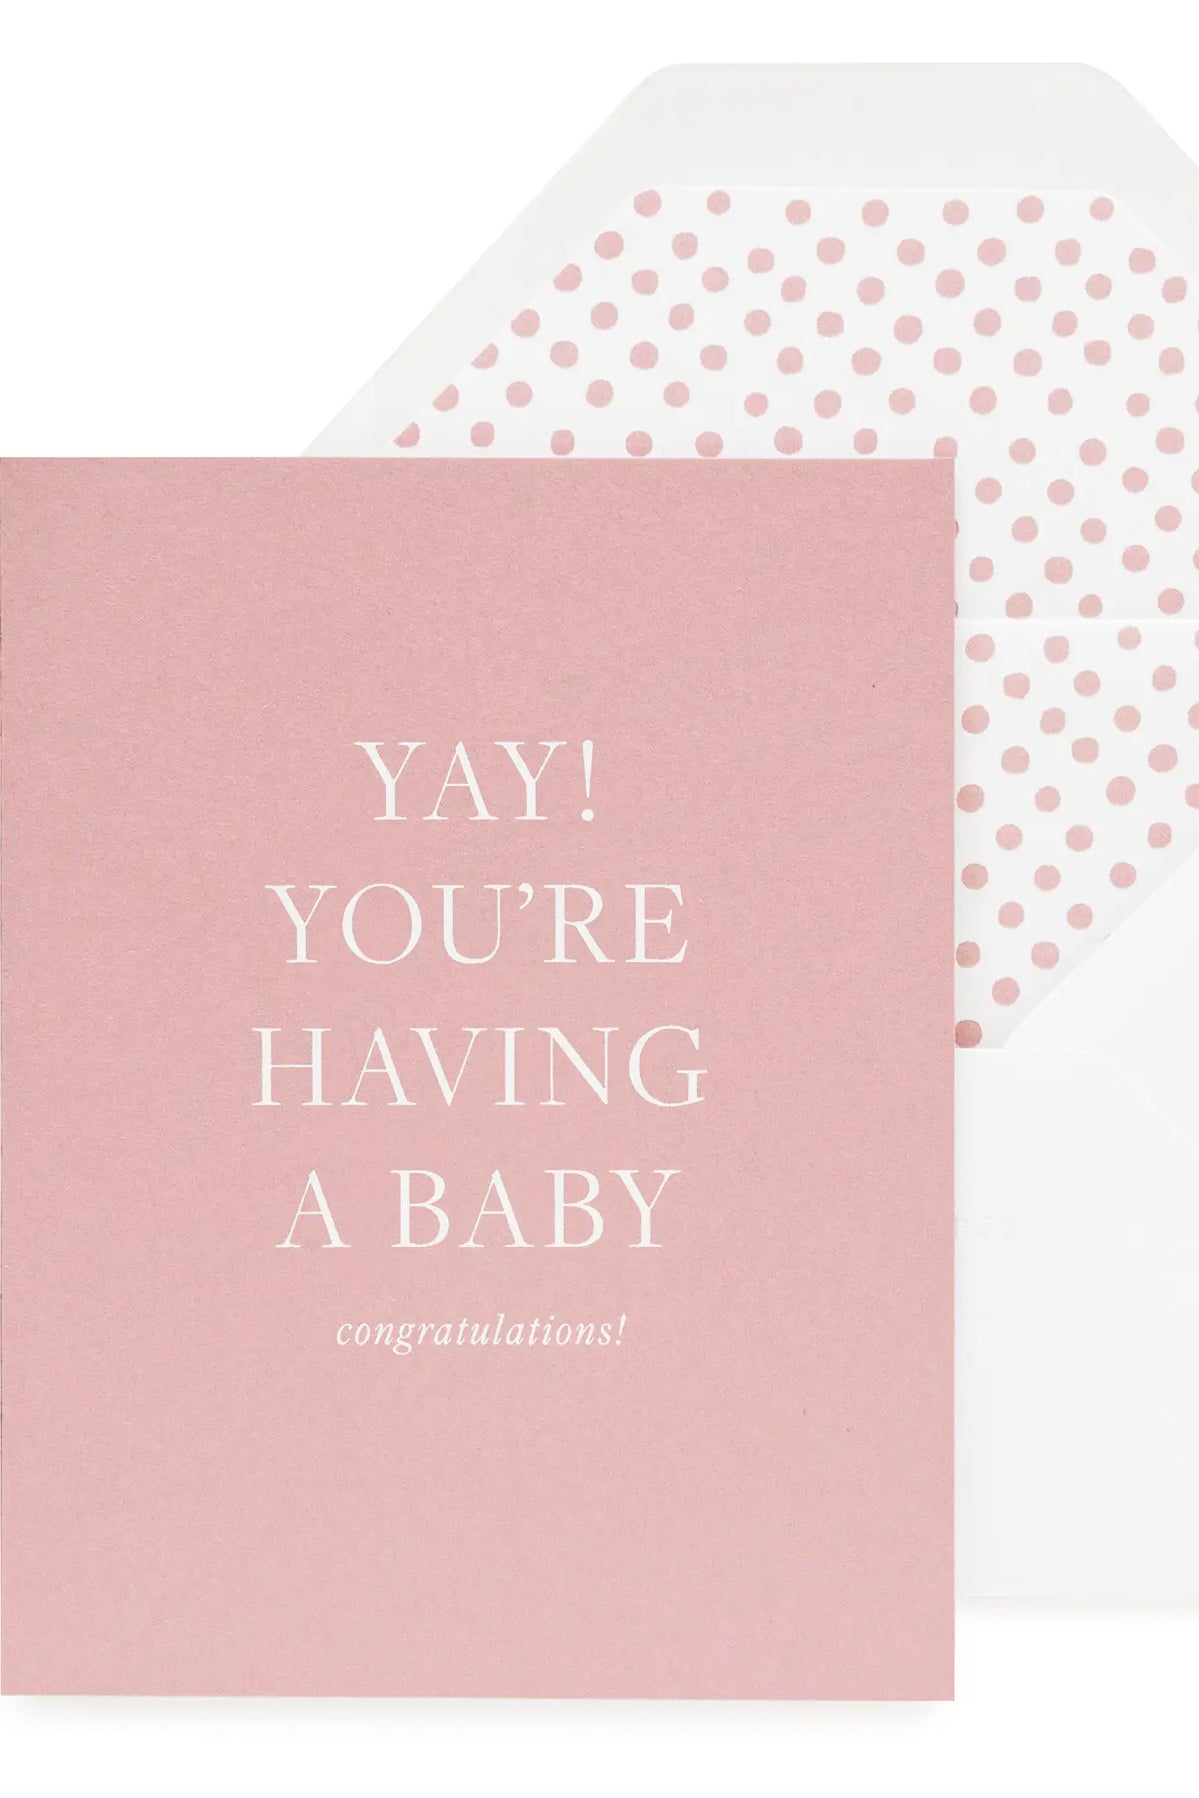 Yay! You're Having a Baby Card